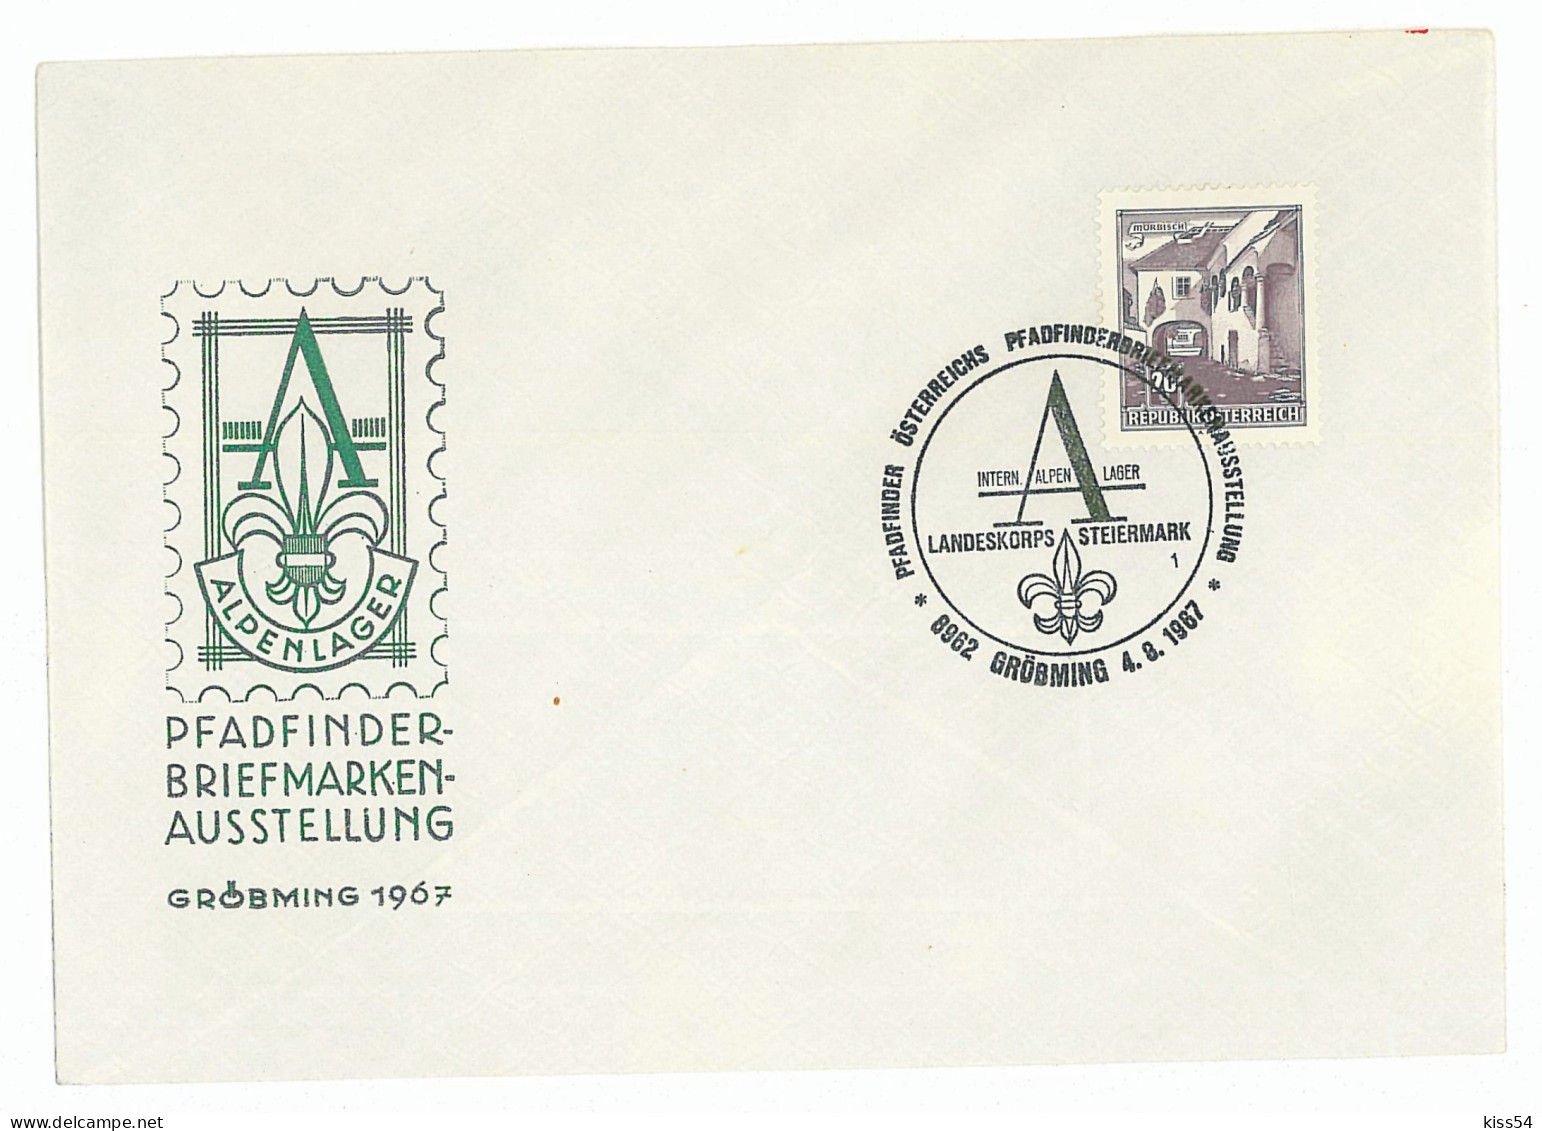 SC 19 - 1025 AUSTRIA, Scout - Cover - 1967 - Covers & Documents